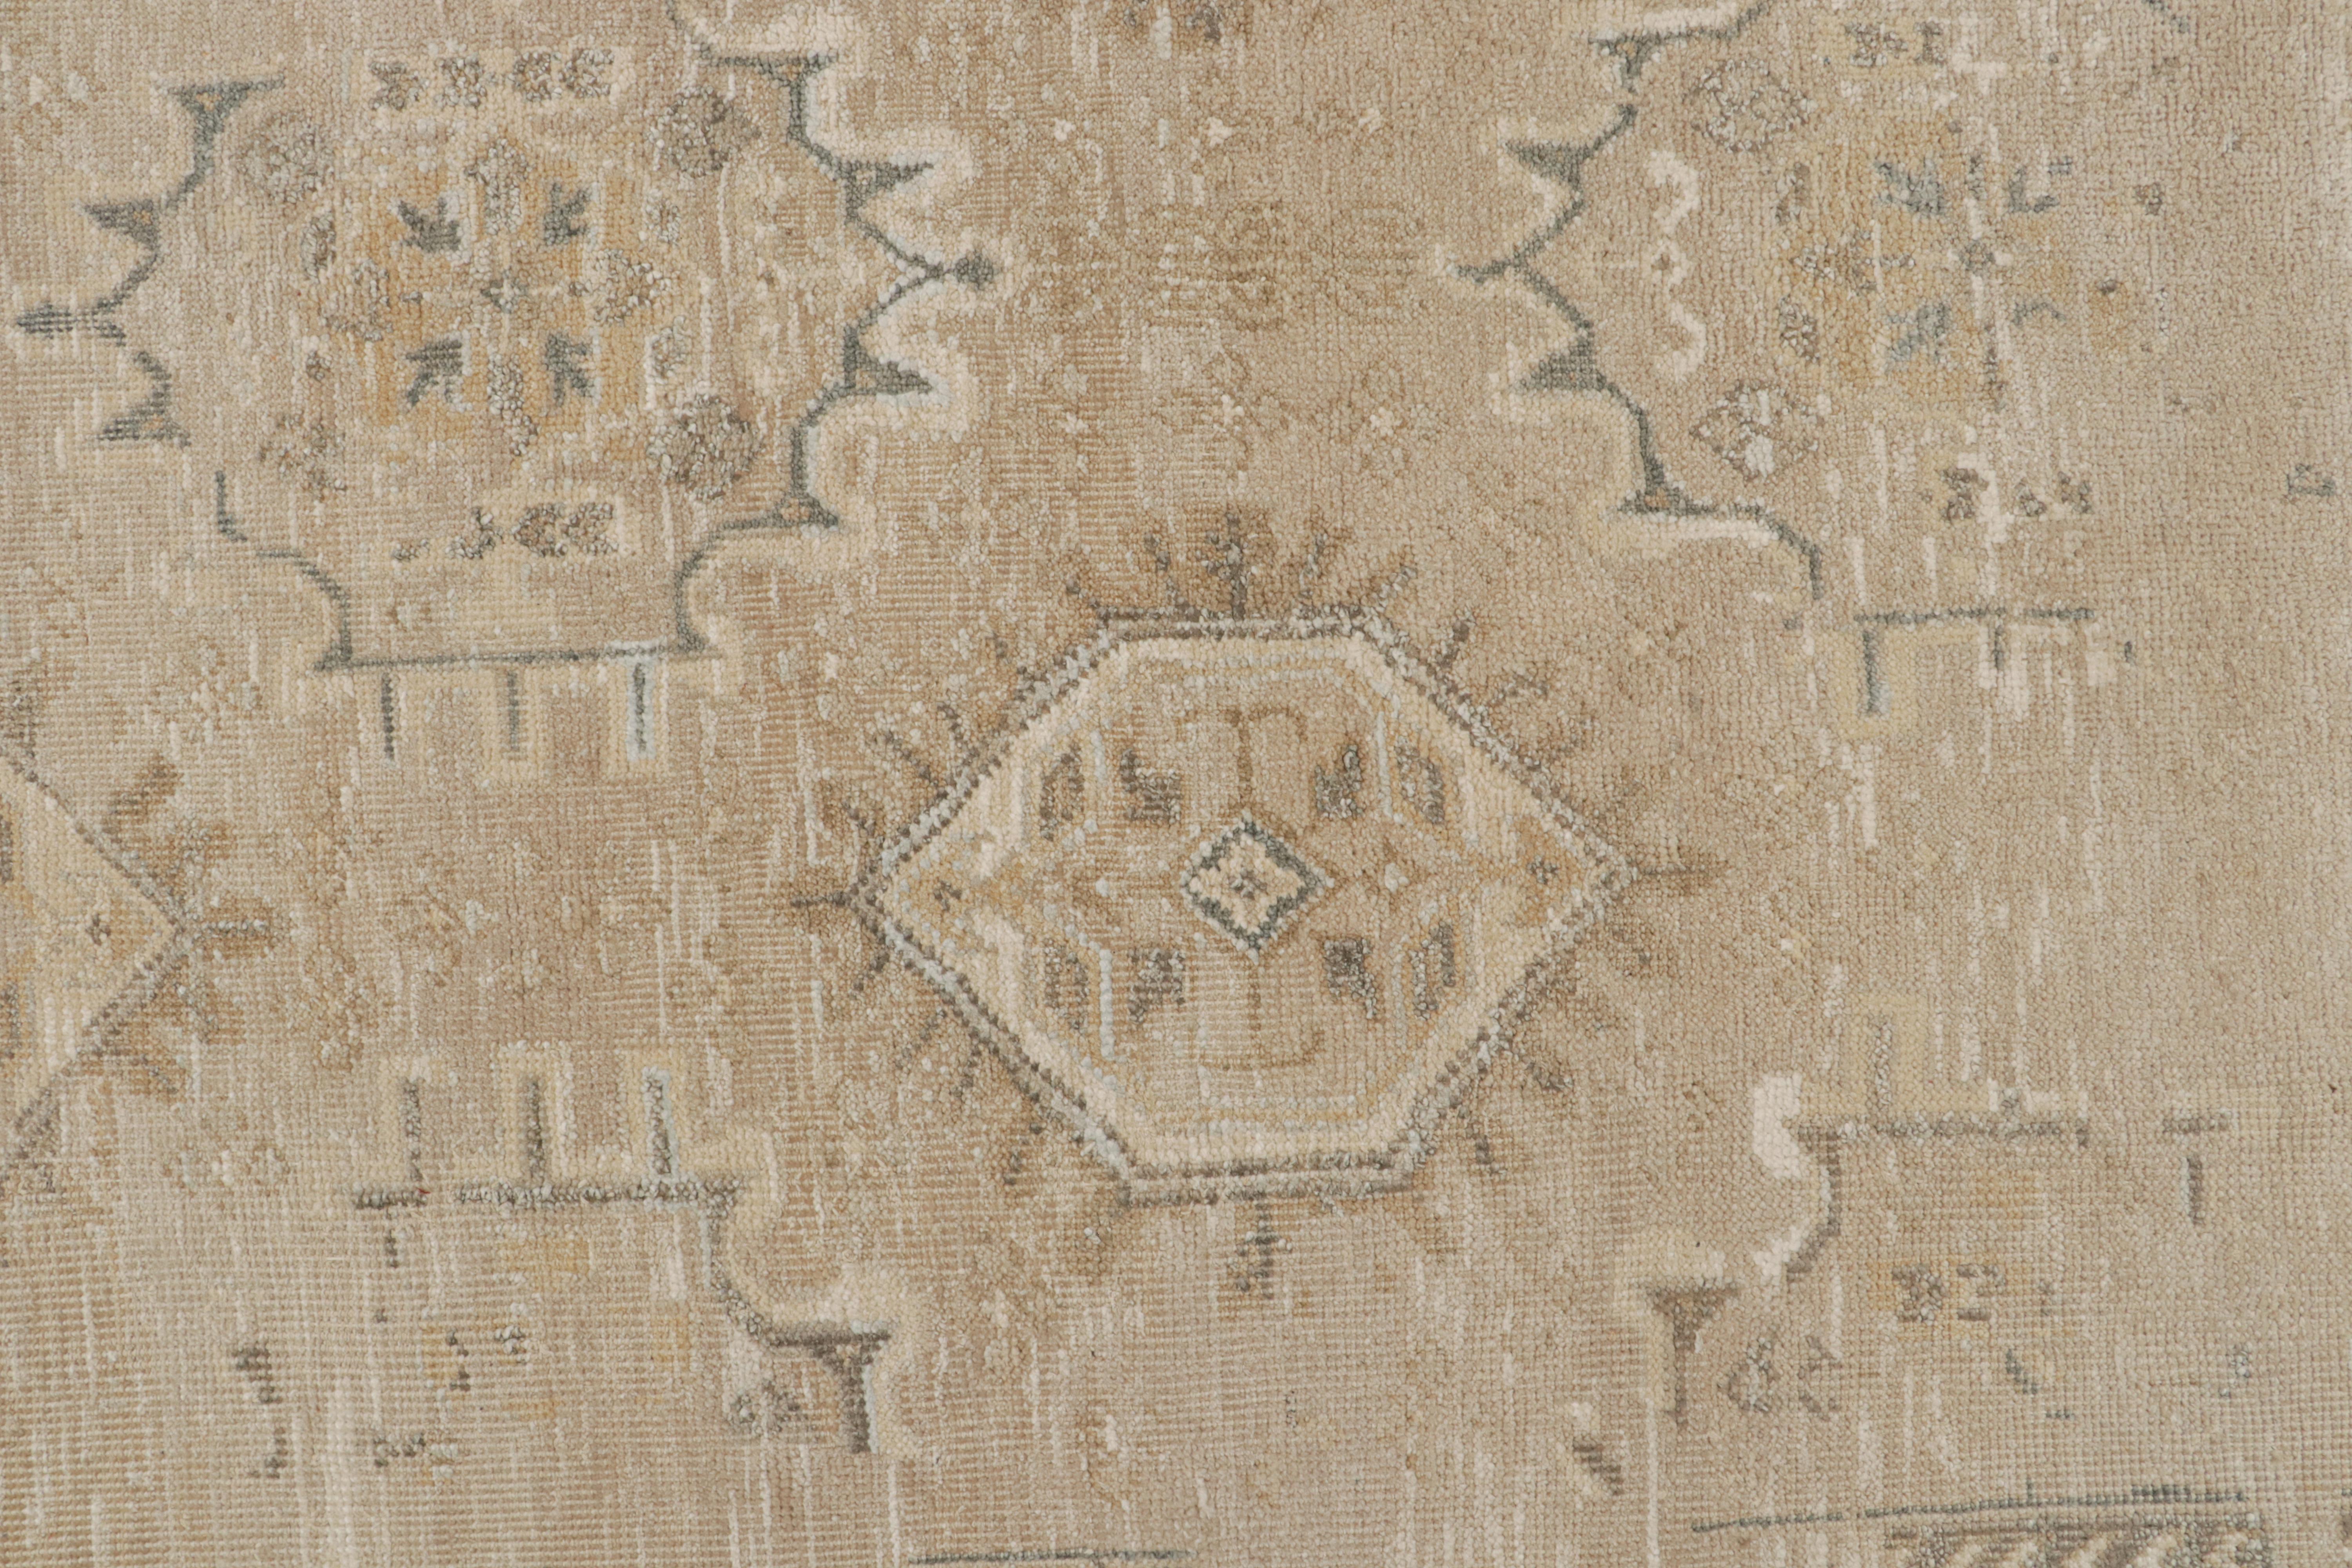 Contemporary Rug & Kilim’s Oushak Style Oversized Rug in Taupe with Floral Patterns For Sale